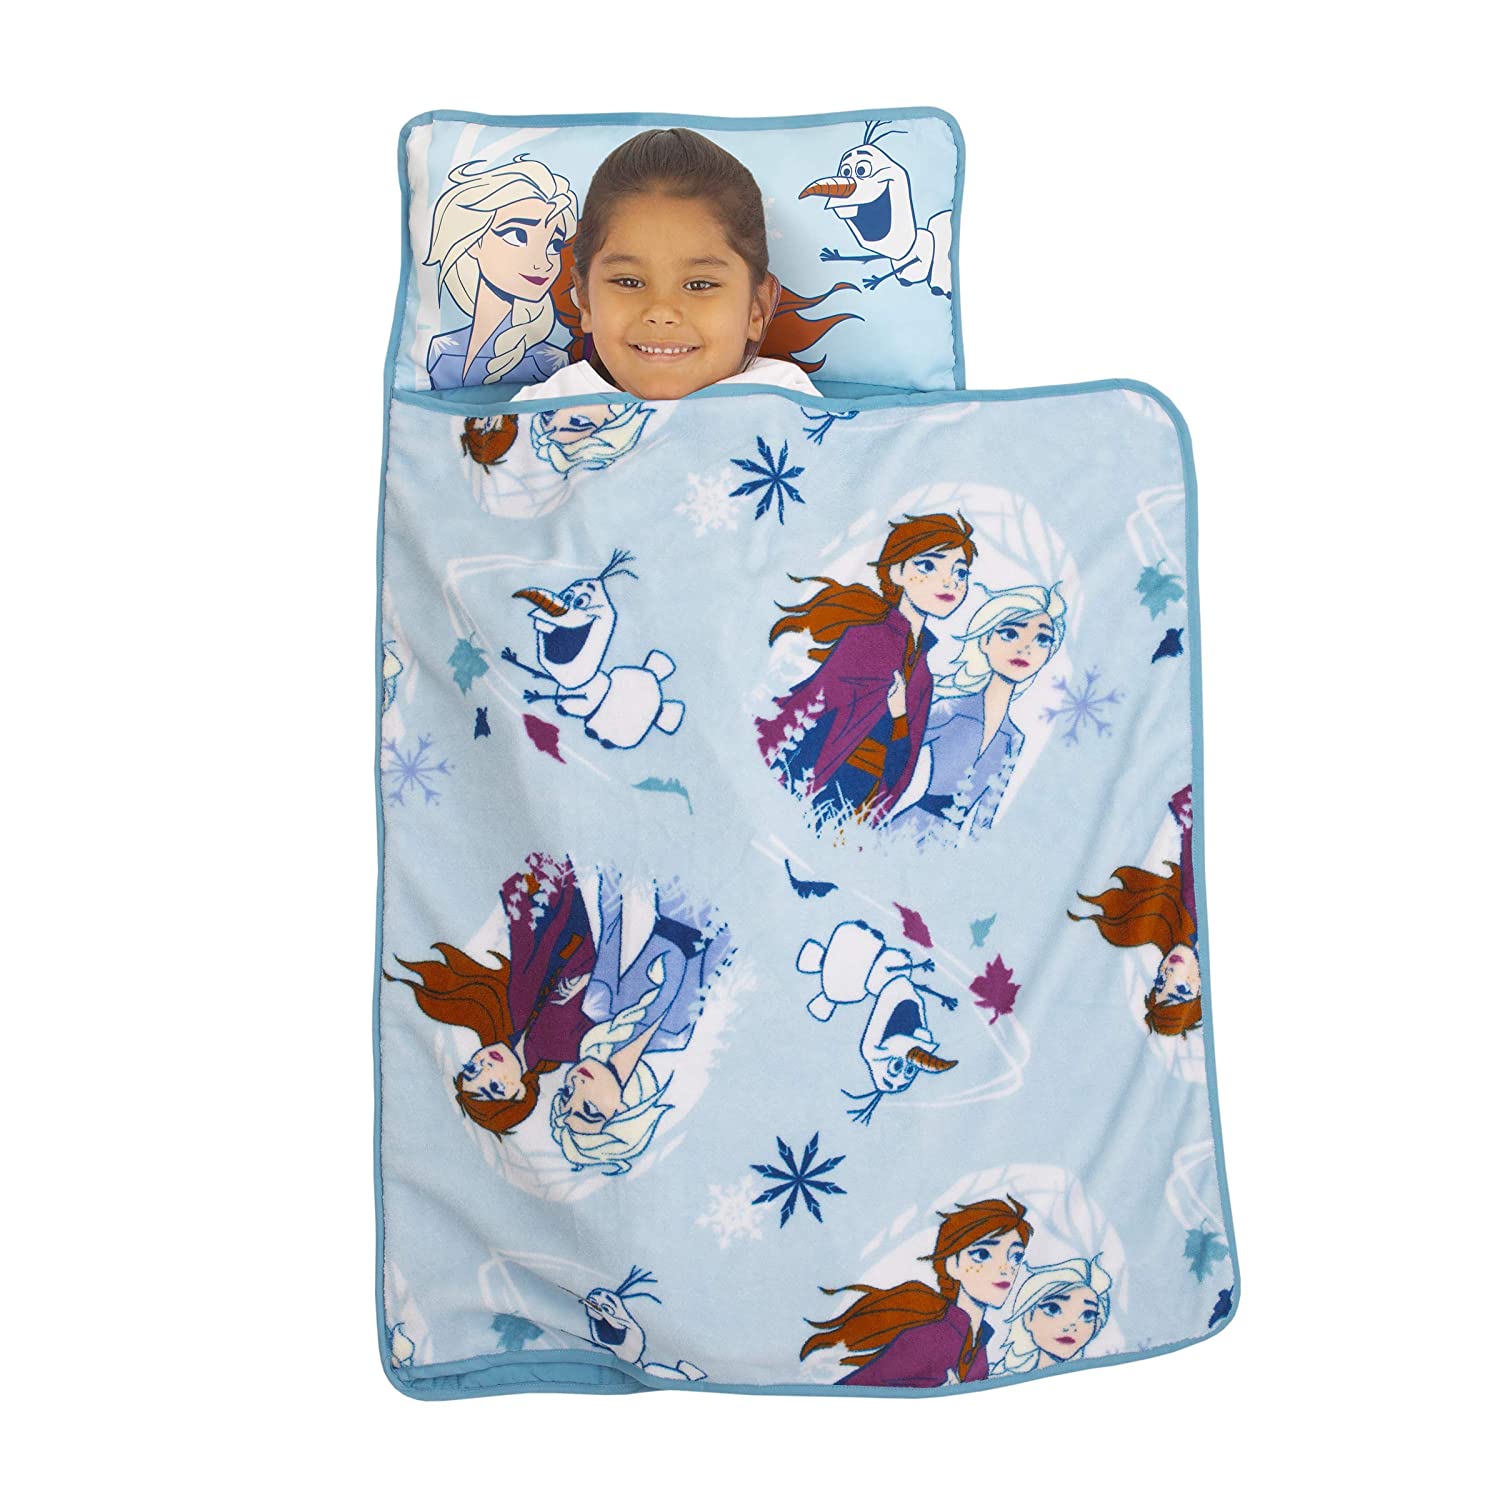 Disney Frozen 2 Spirit of Nature Padded Nap Mat, Blue, Purple, Yellow - with Built in Pillow, Blanket & Name Label